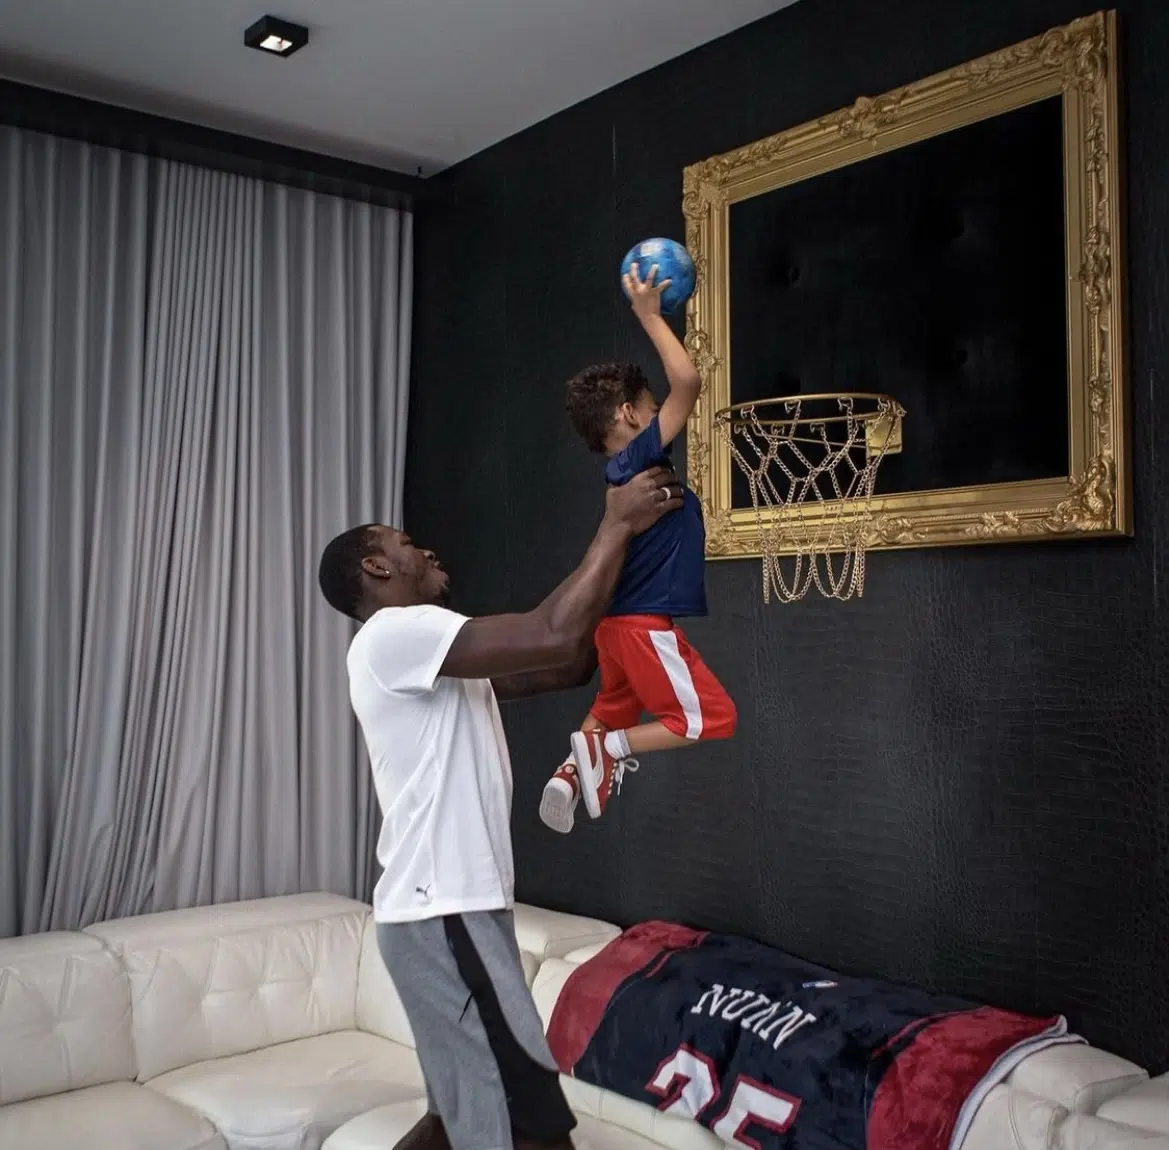 A man and a child playing basketball in a living room.